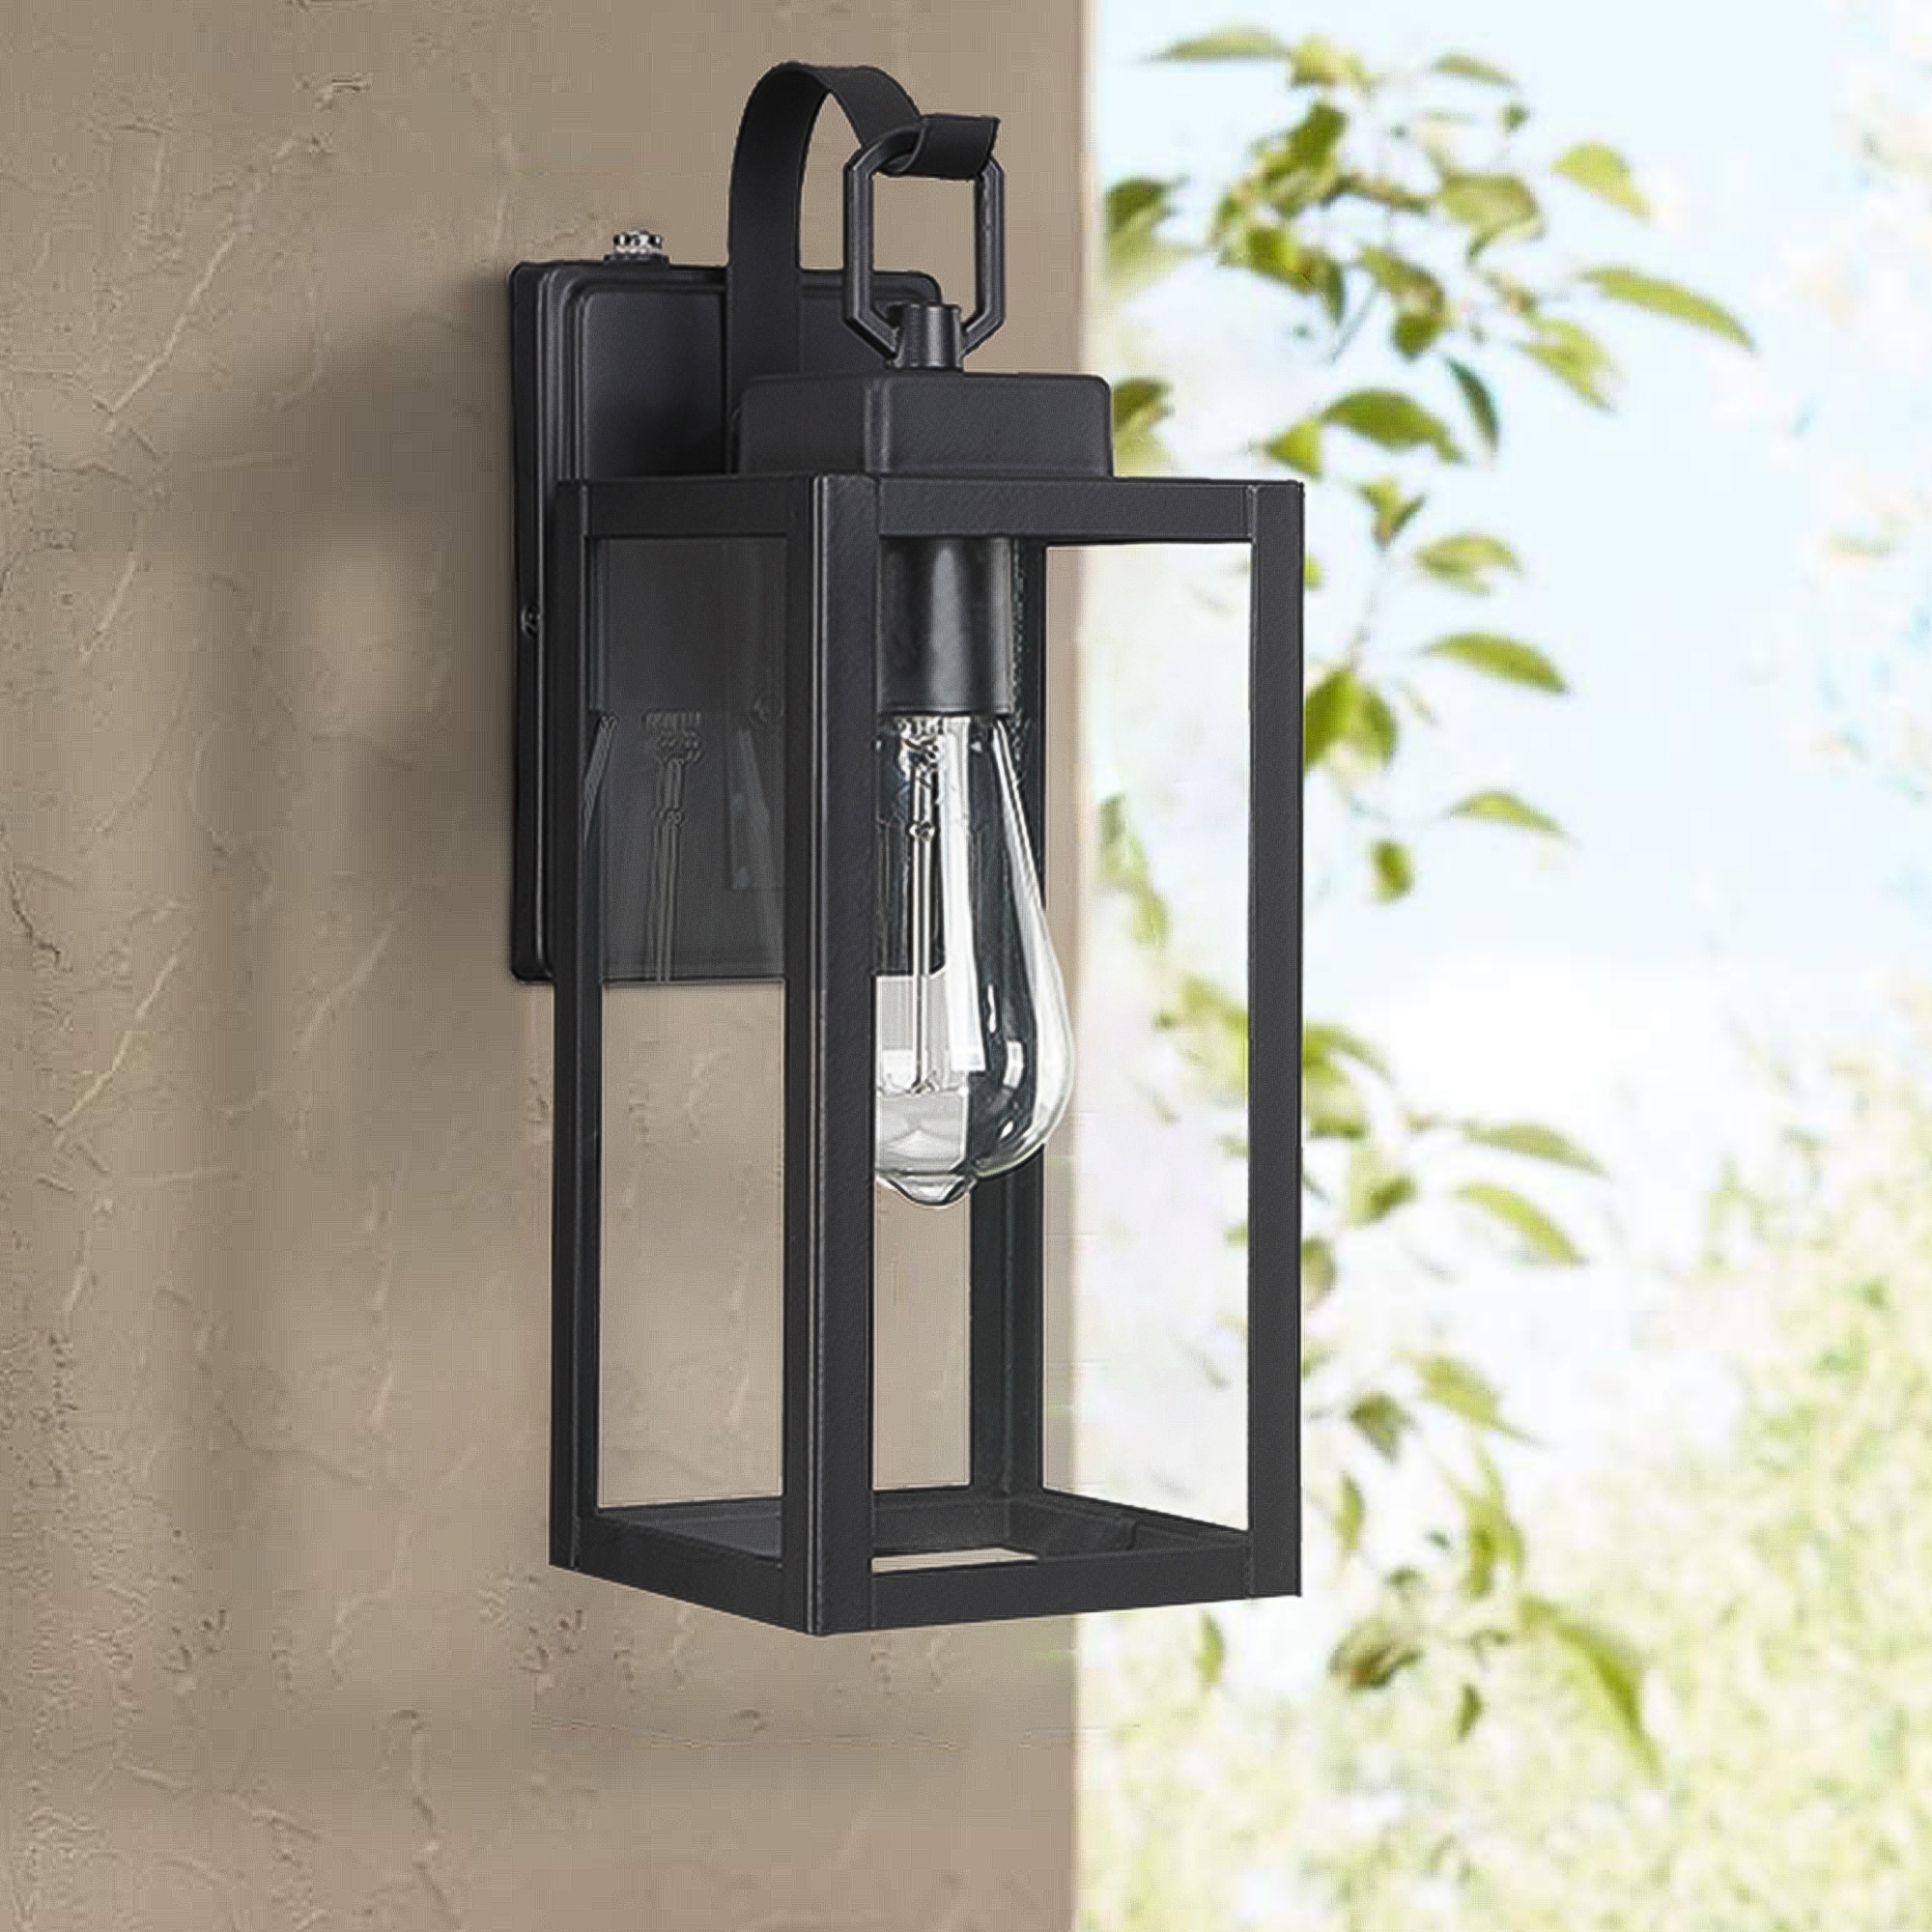 Dusk to Dawn Waterproof Wall Sconce Light Fixture for Porch Bed Bath   Beyond 36326072